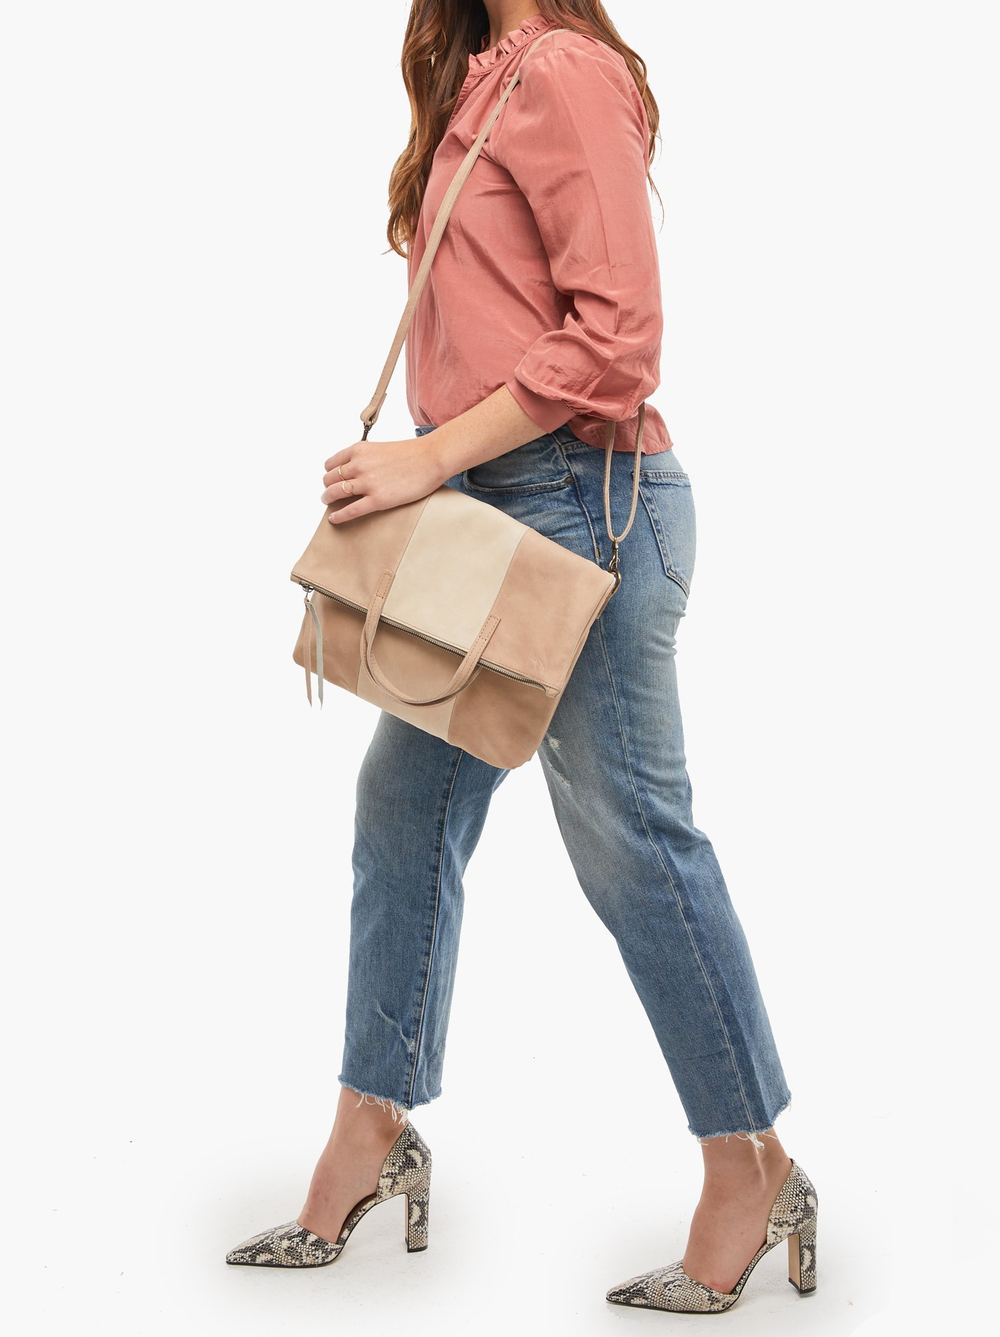 Emnet Foldover Tote - Kingfisher Road - Online Boutique